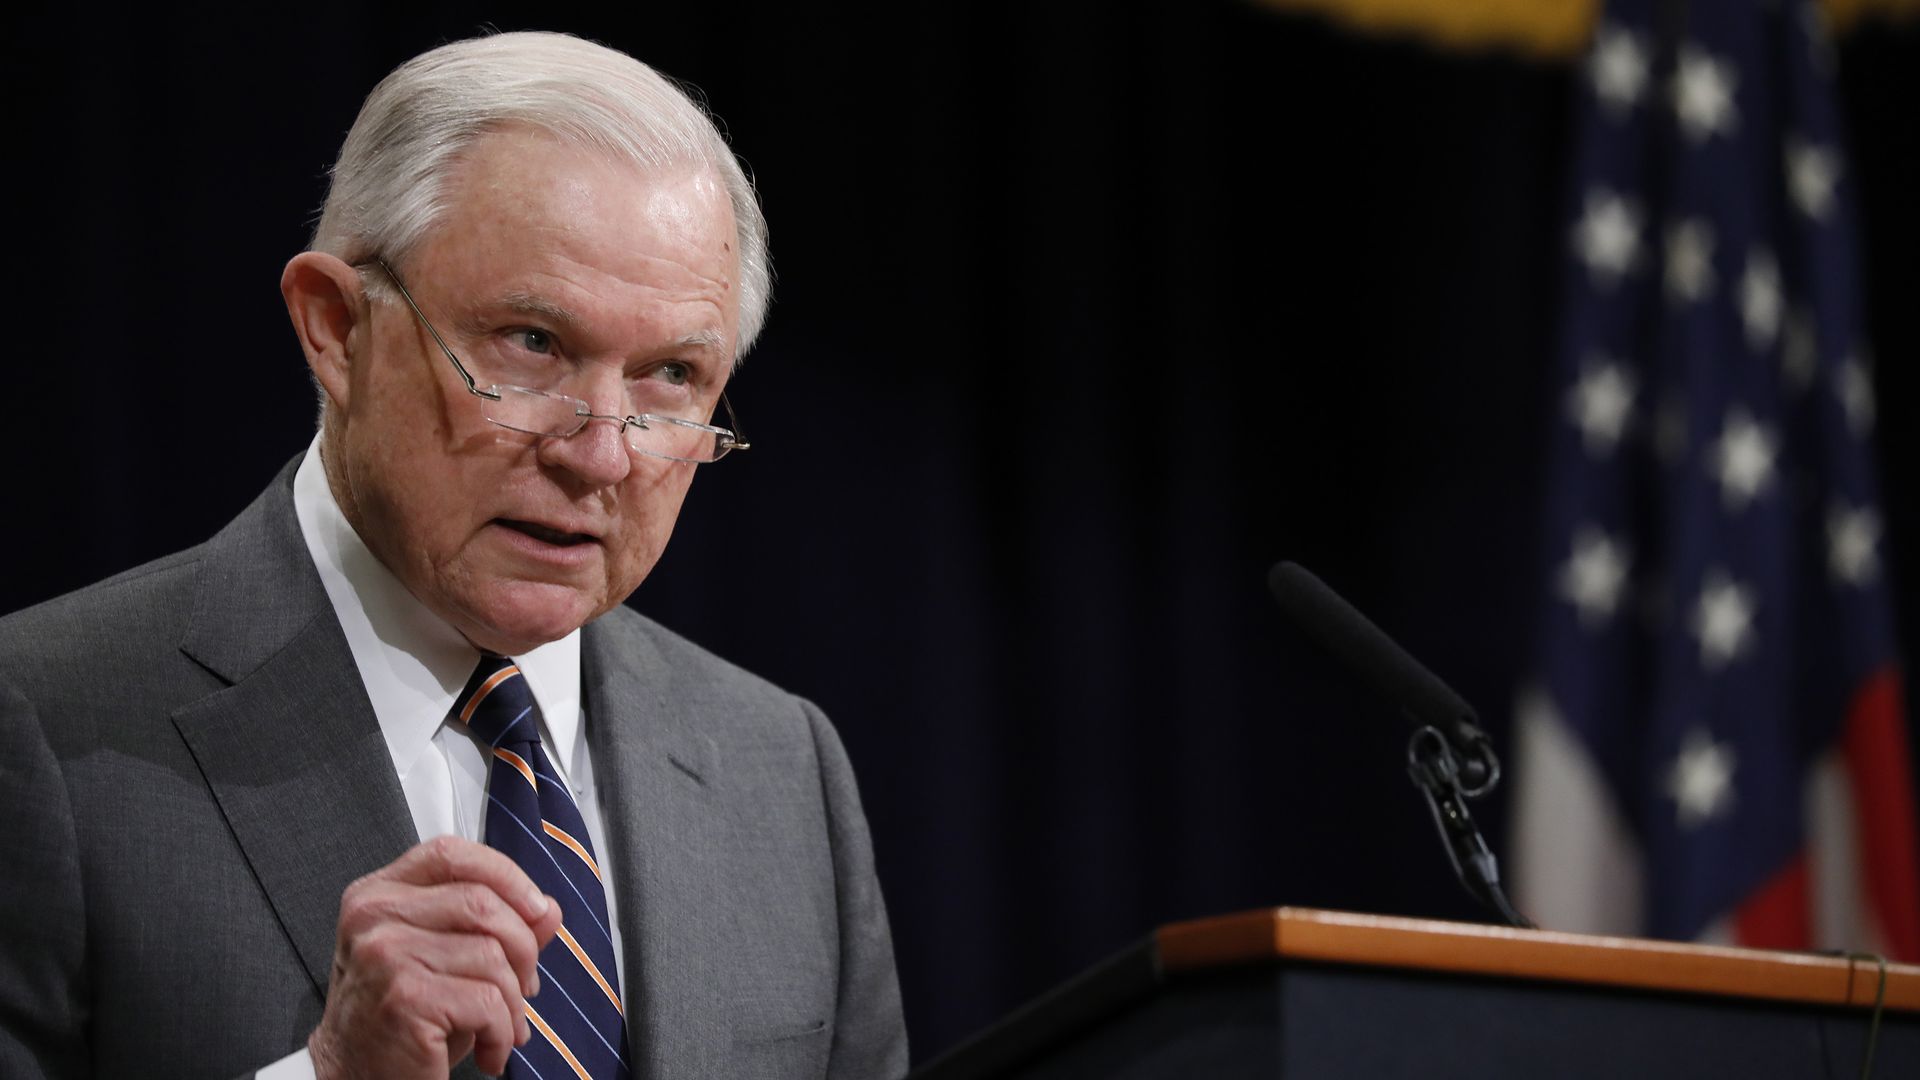 Attorney General Jeff Sessions. Photo: Aaron P. Bernstein/Getty Images